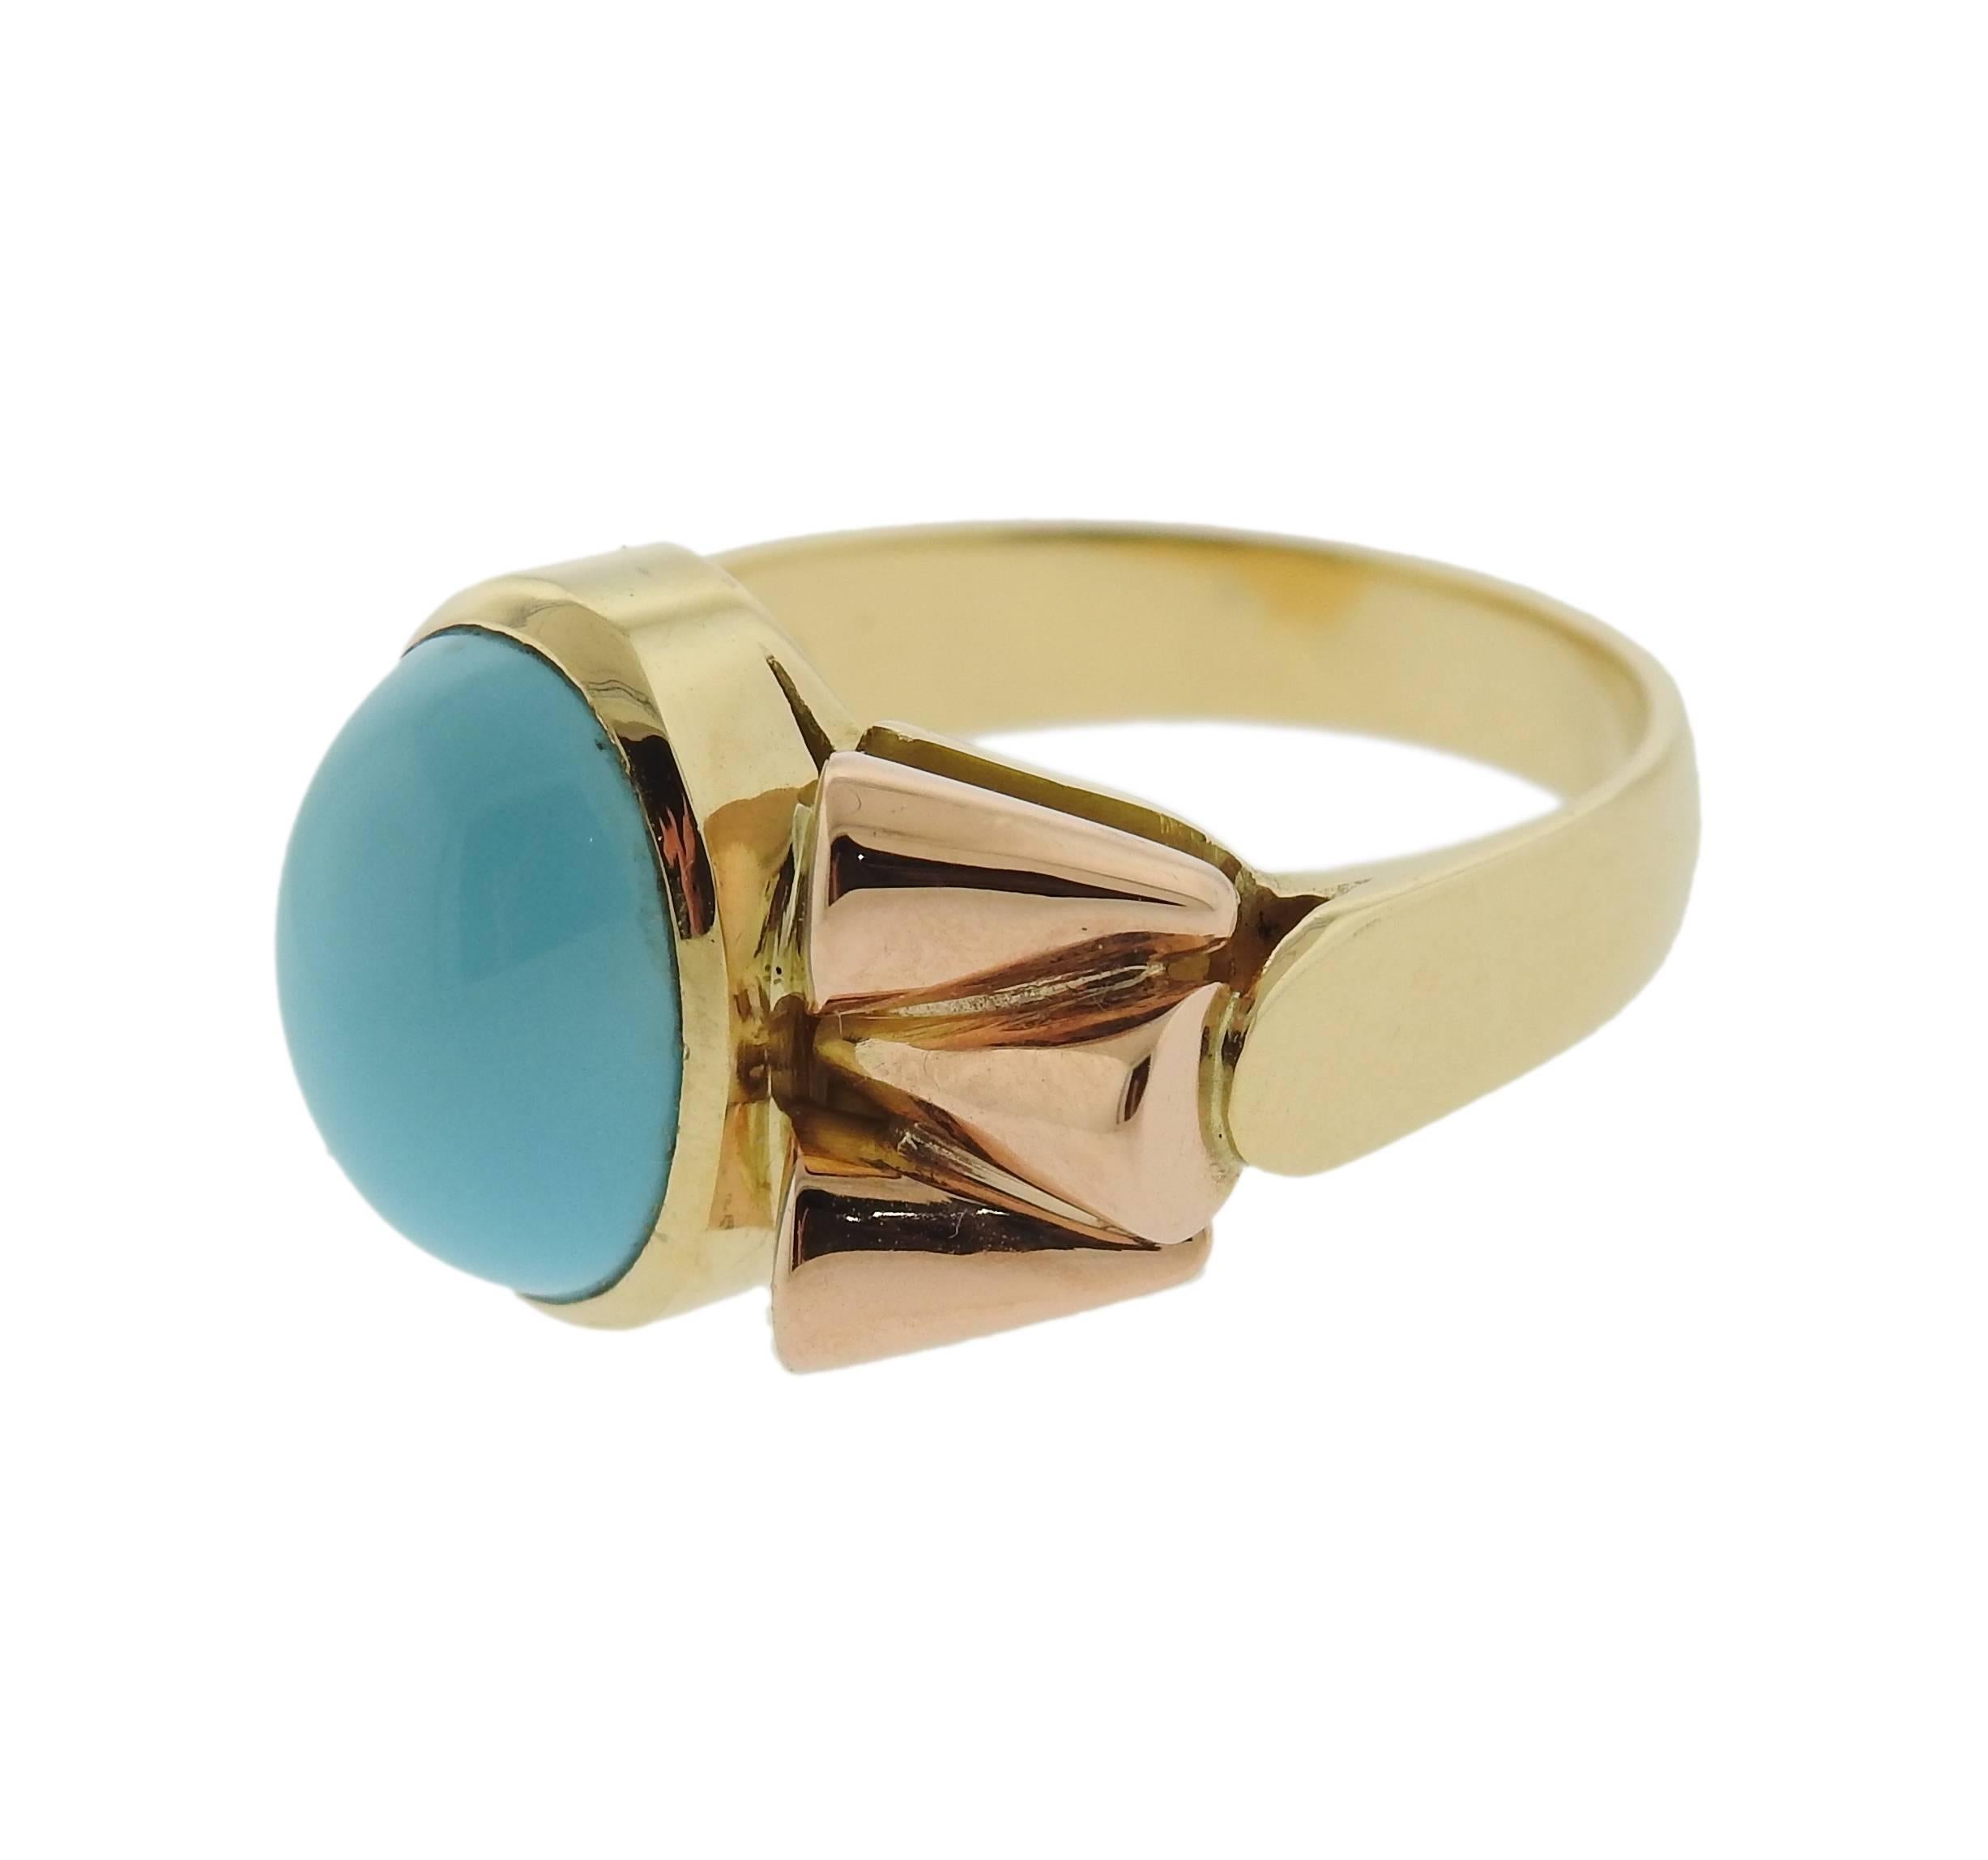 An 18k gold ring crafted by Giorgio Facchini featuring turquoise cabochon. Ring is a size 7 1/2, ring top is 13.6mm wide. Marked G.Facchini signature, 750. Weight is 10.8 grams.